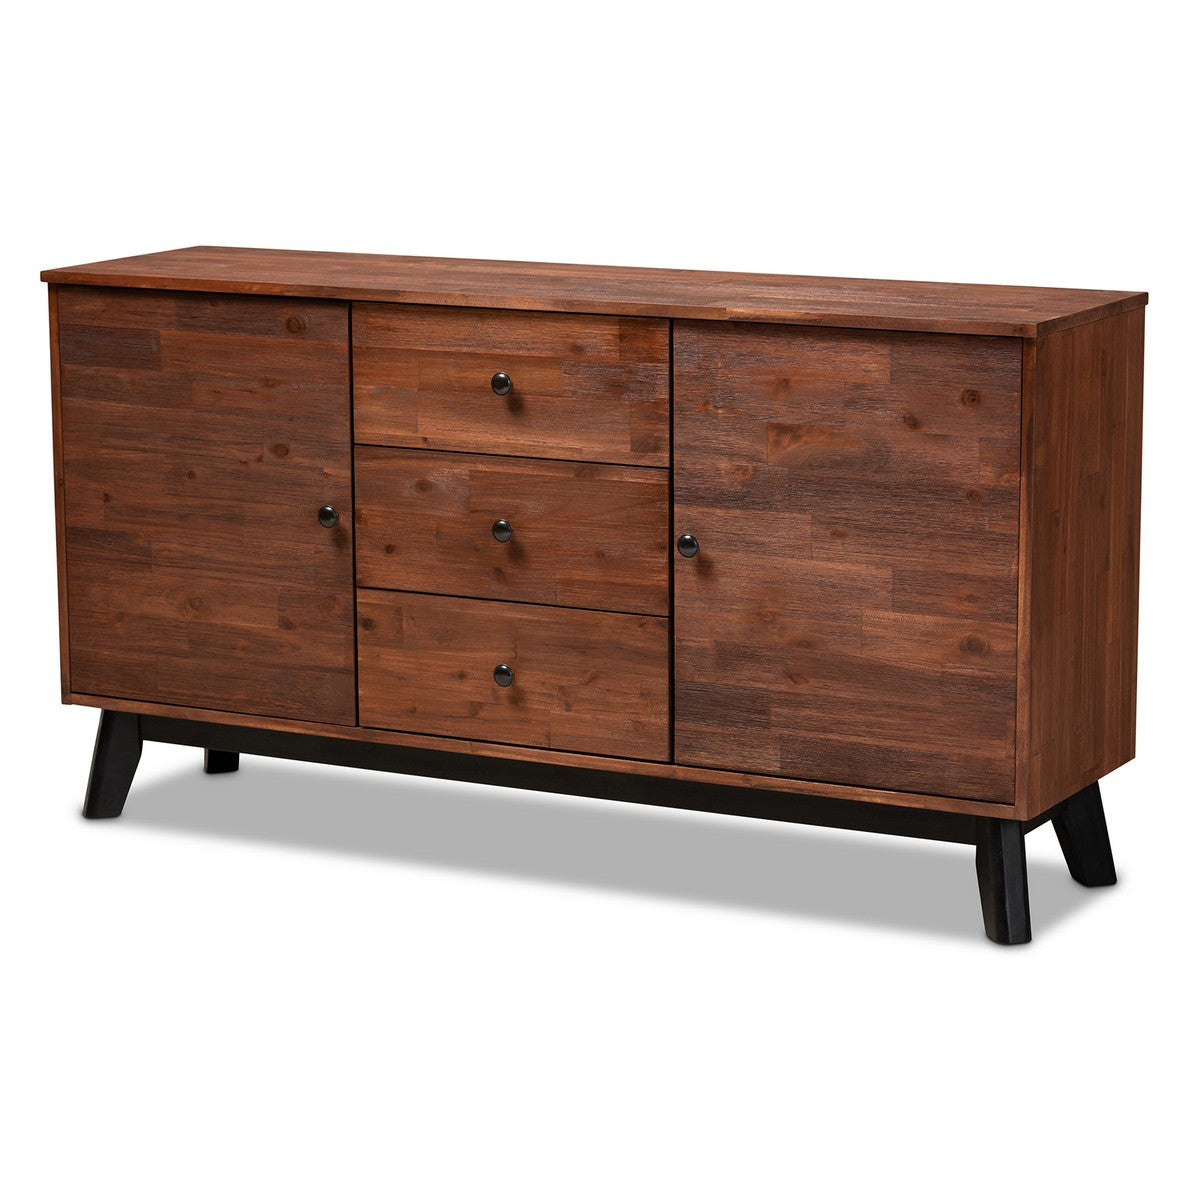 Baxton Studio Calla Modern and Contemporary Brown and Black Oak Finished 2-Door Wood Sideboard Buffet Baxton Studio-Sideboard-Minimal And Modern - 1